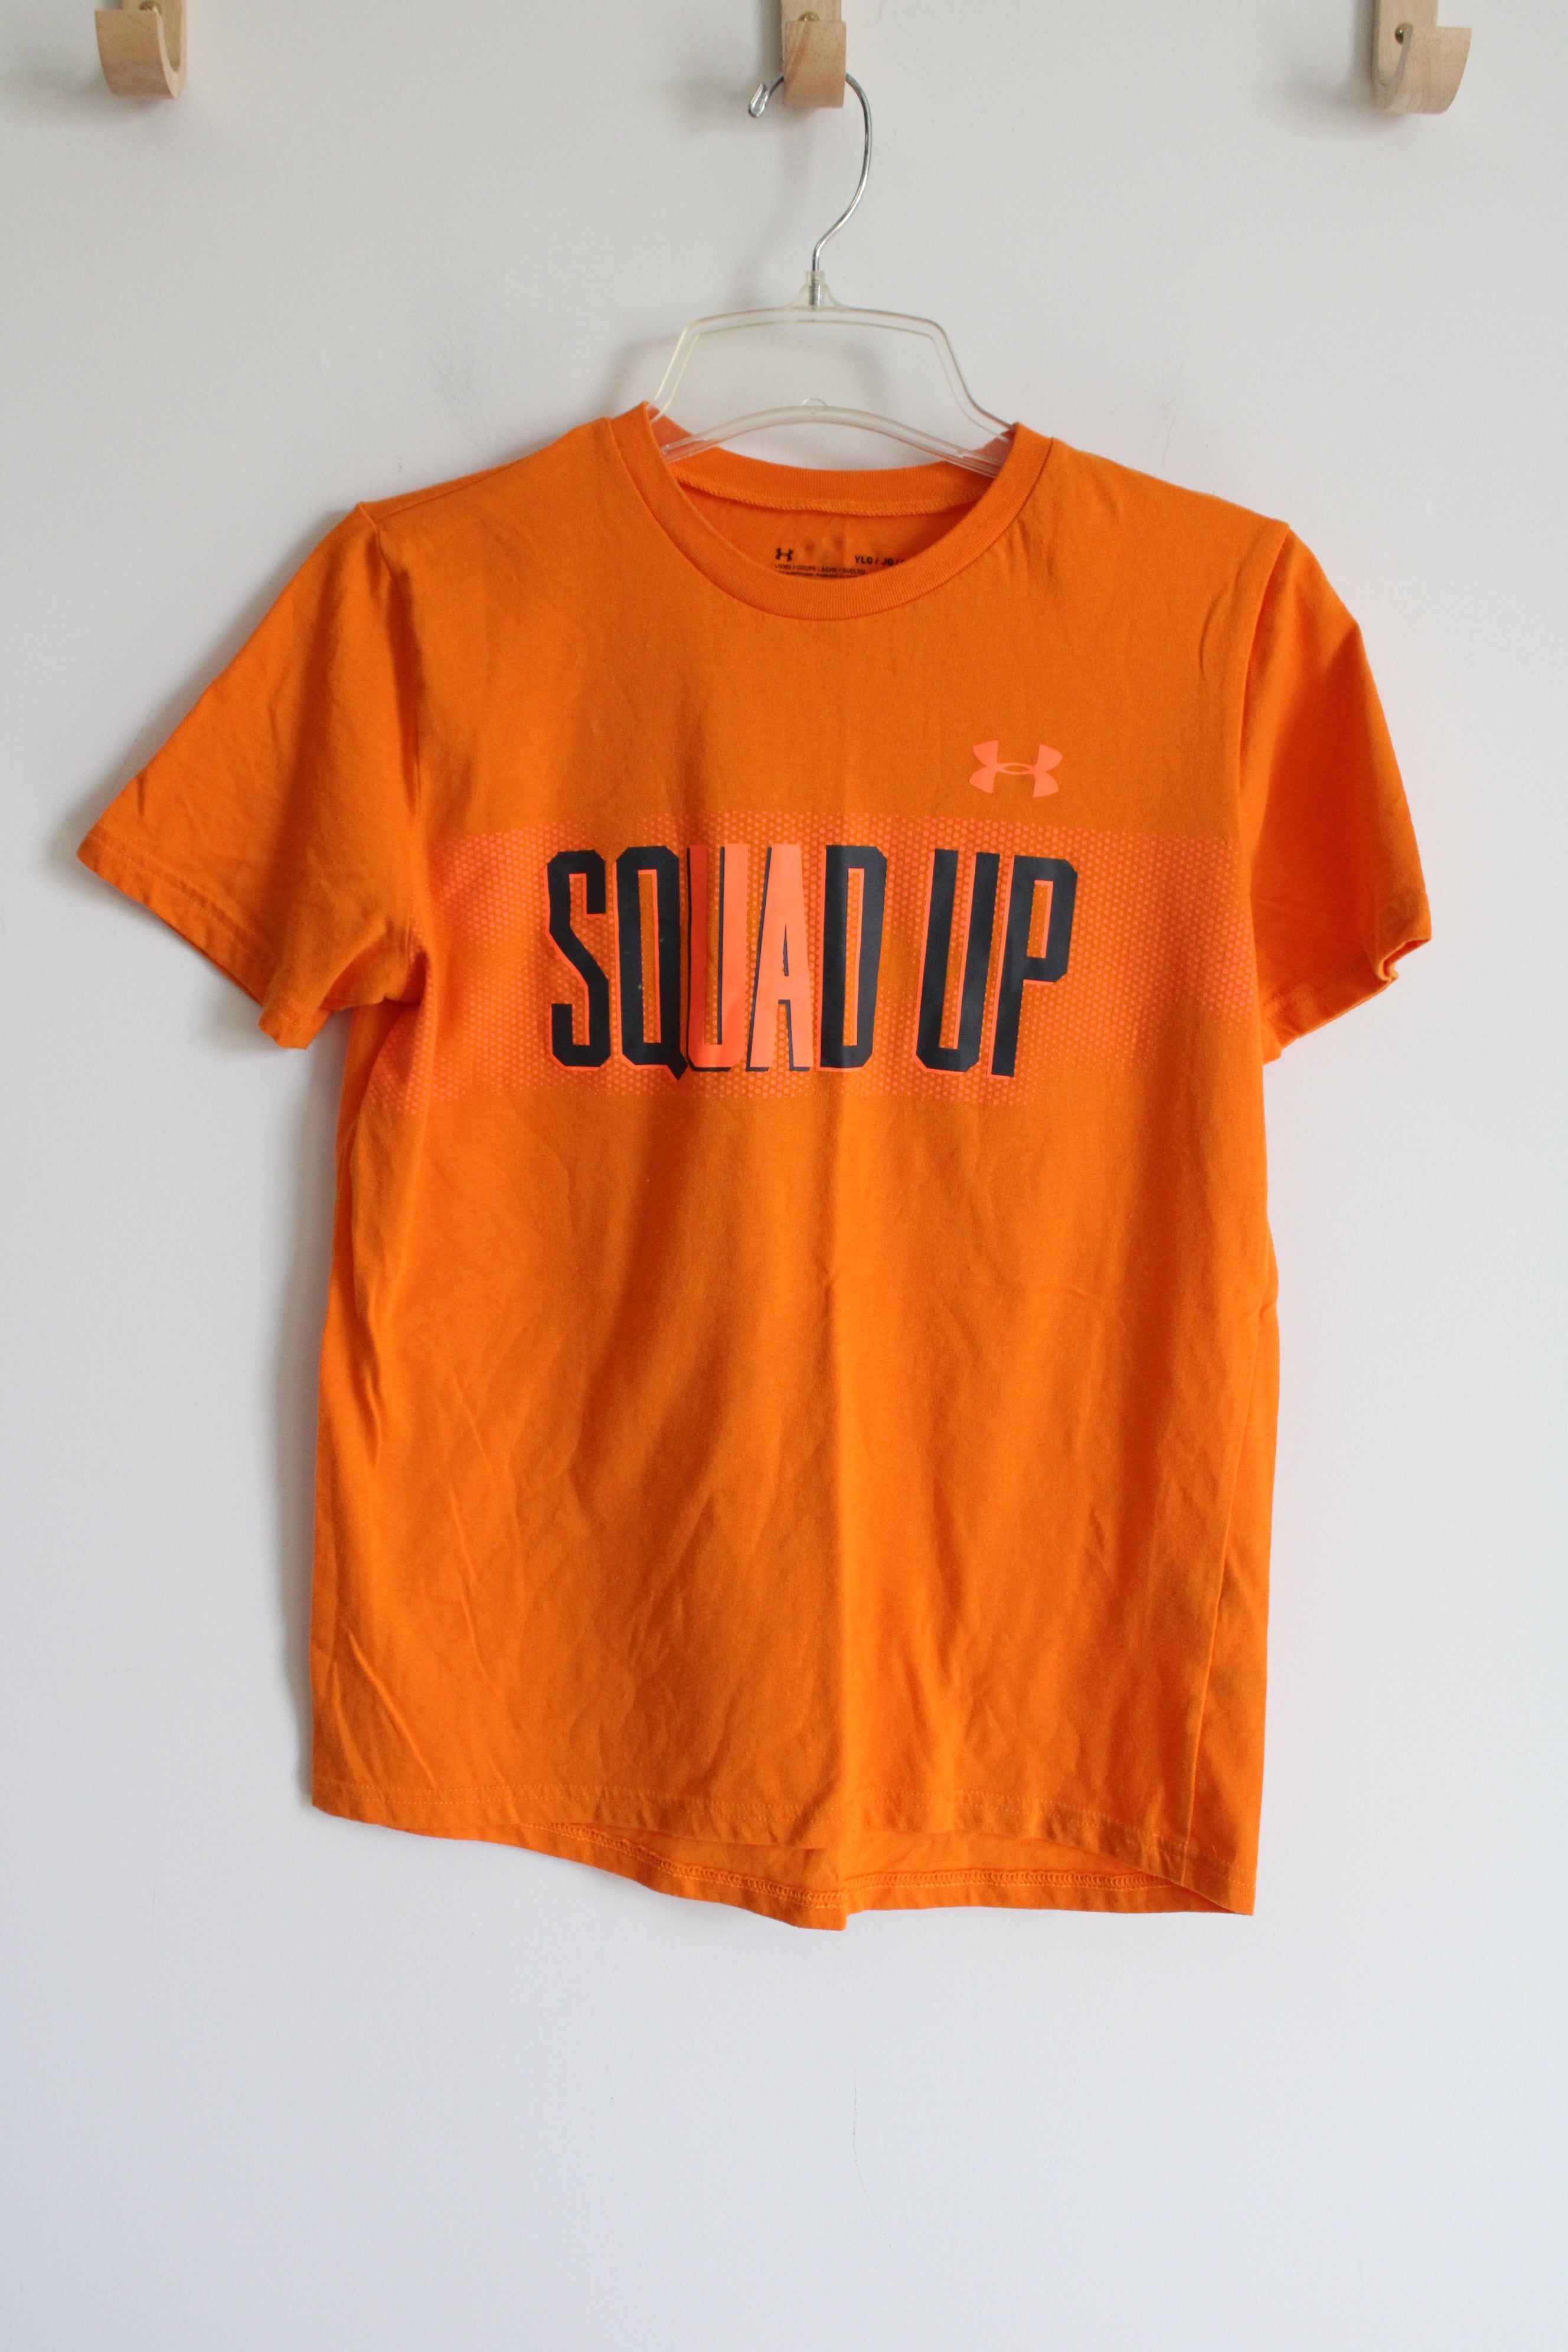 Under Armour Loose Fit HeatGear Squad Up Orange Tee | Youth L (14/16)